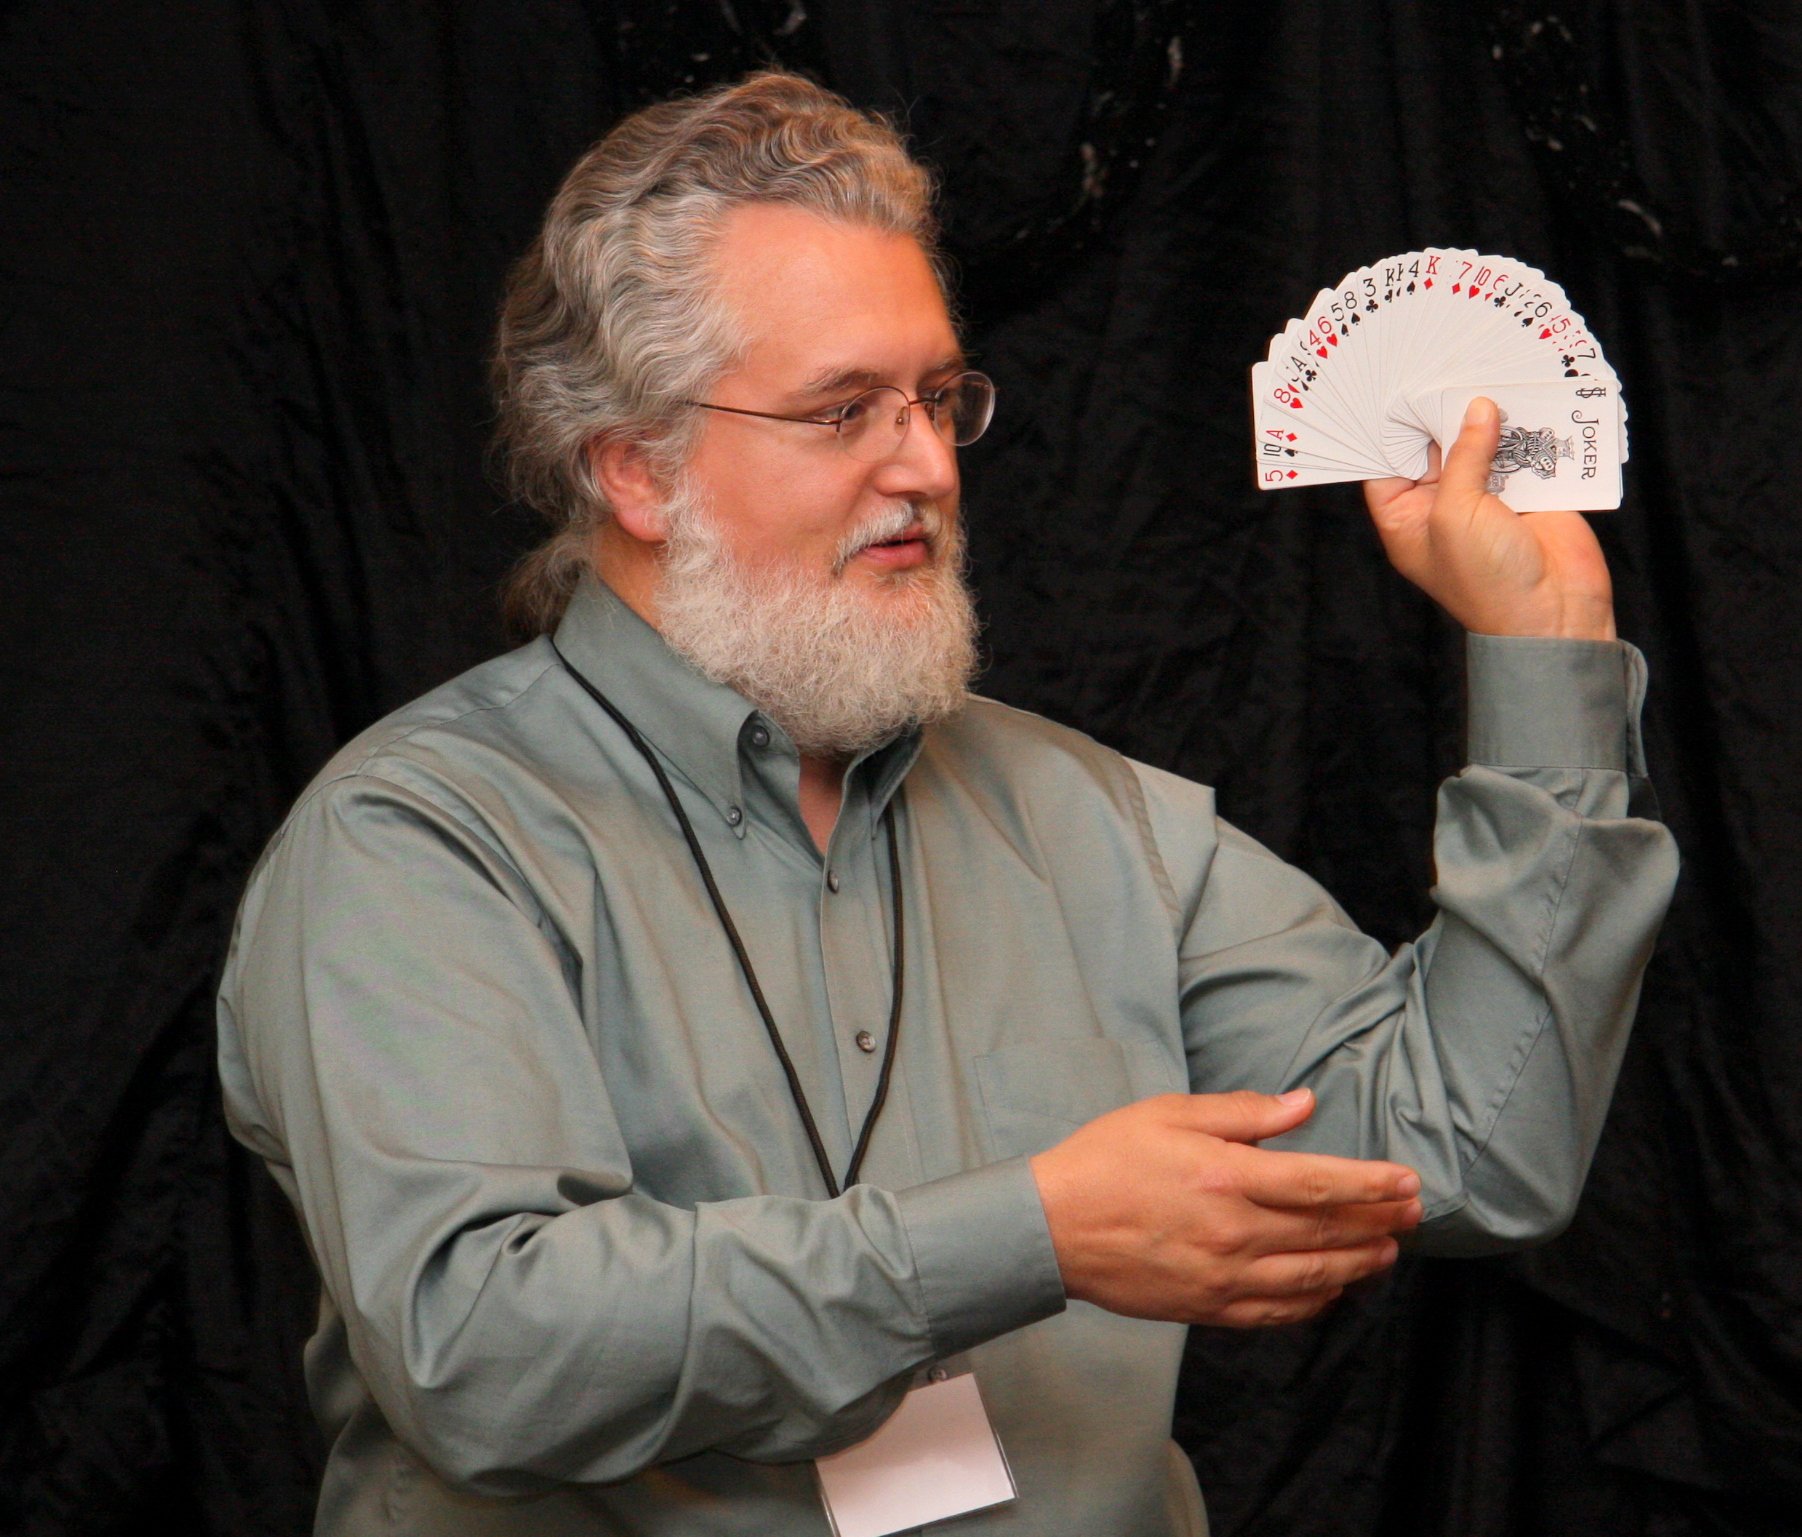 Mark Connelly Wilson performs a card trick during a lecture.